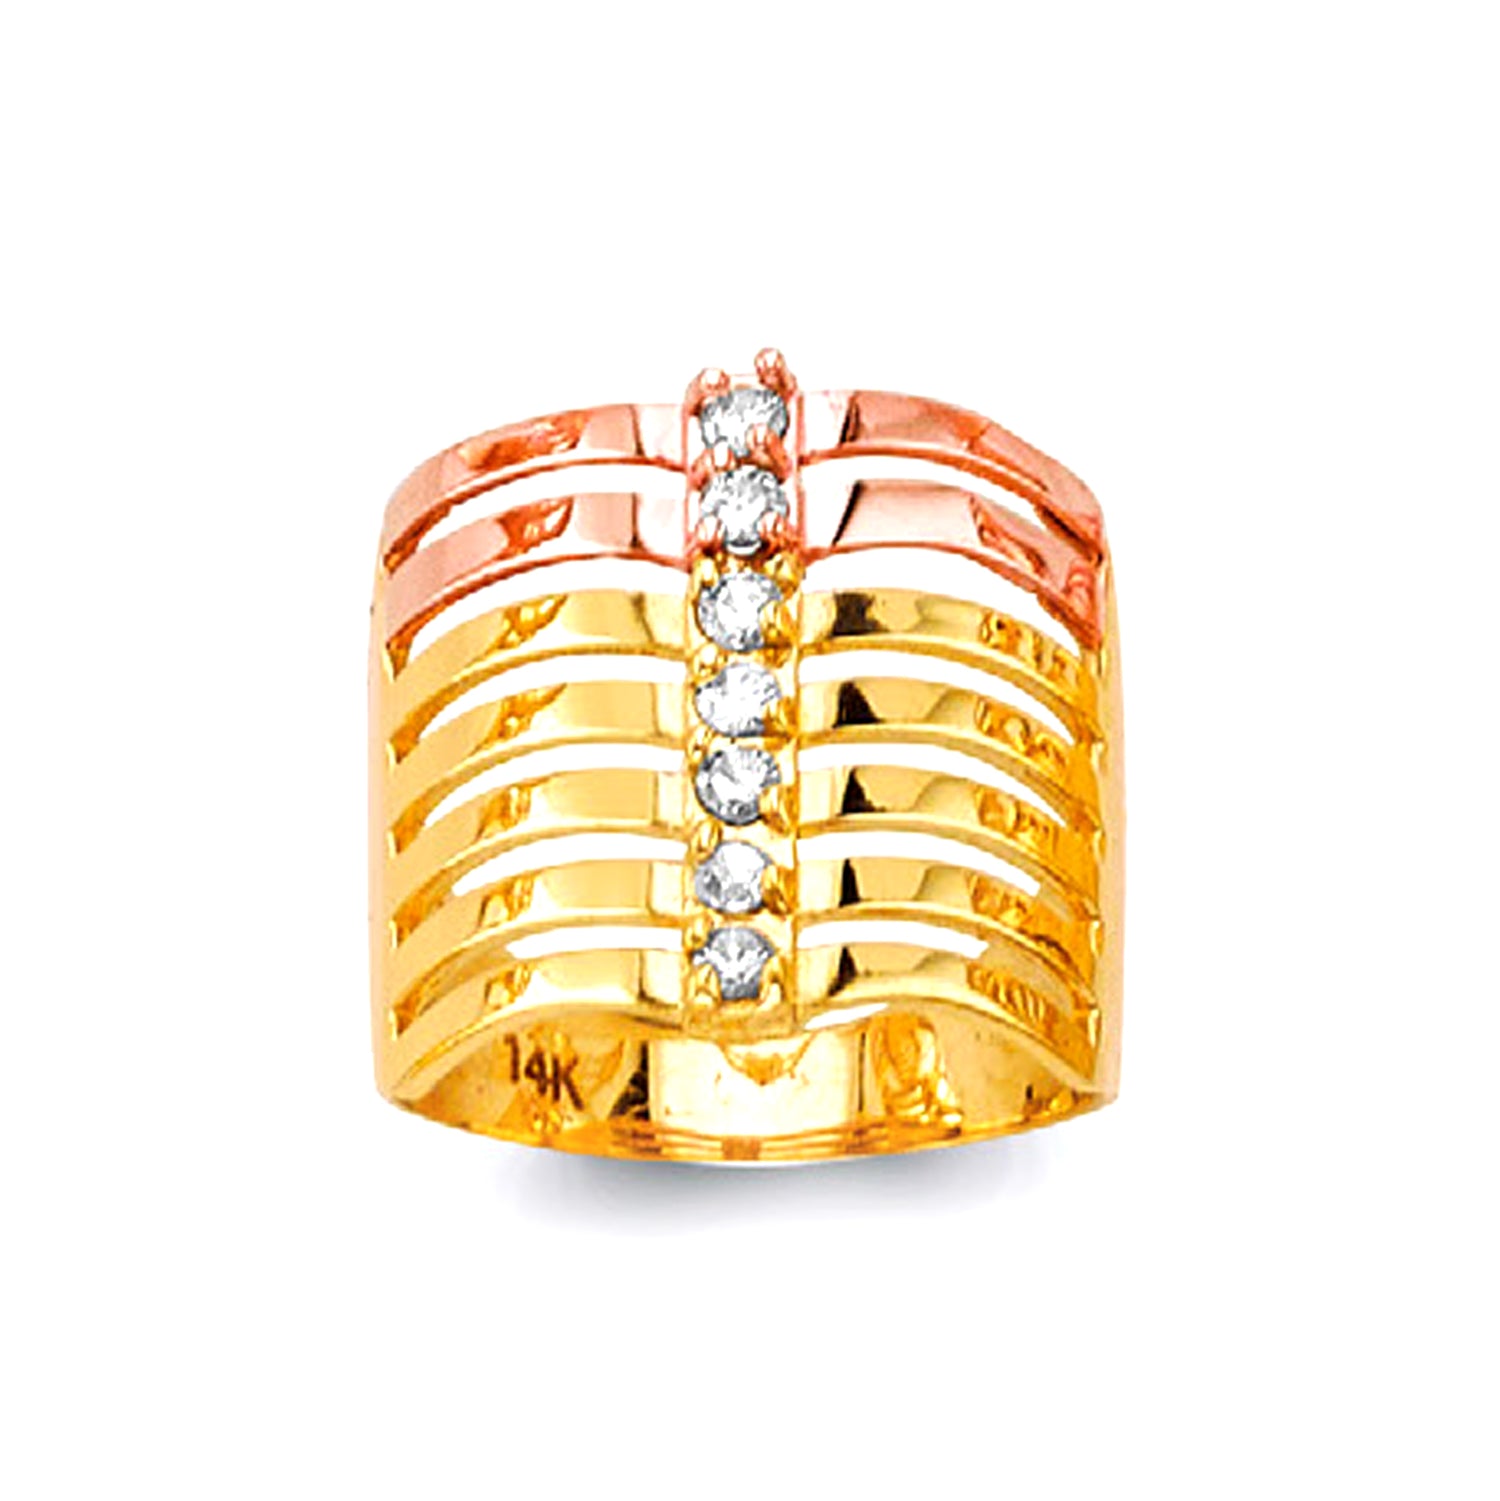 CZ Stylish 7 Row Ring in Solid Gold 